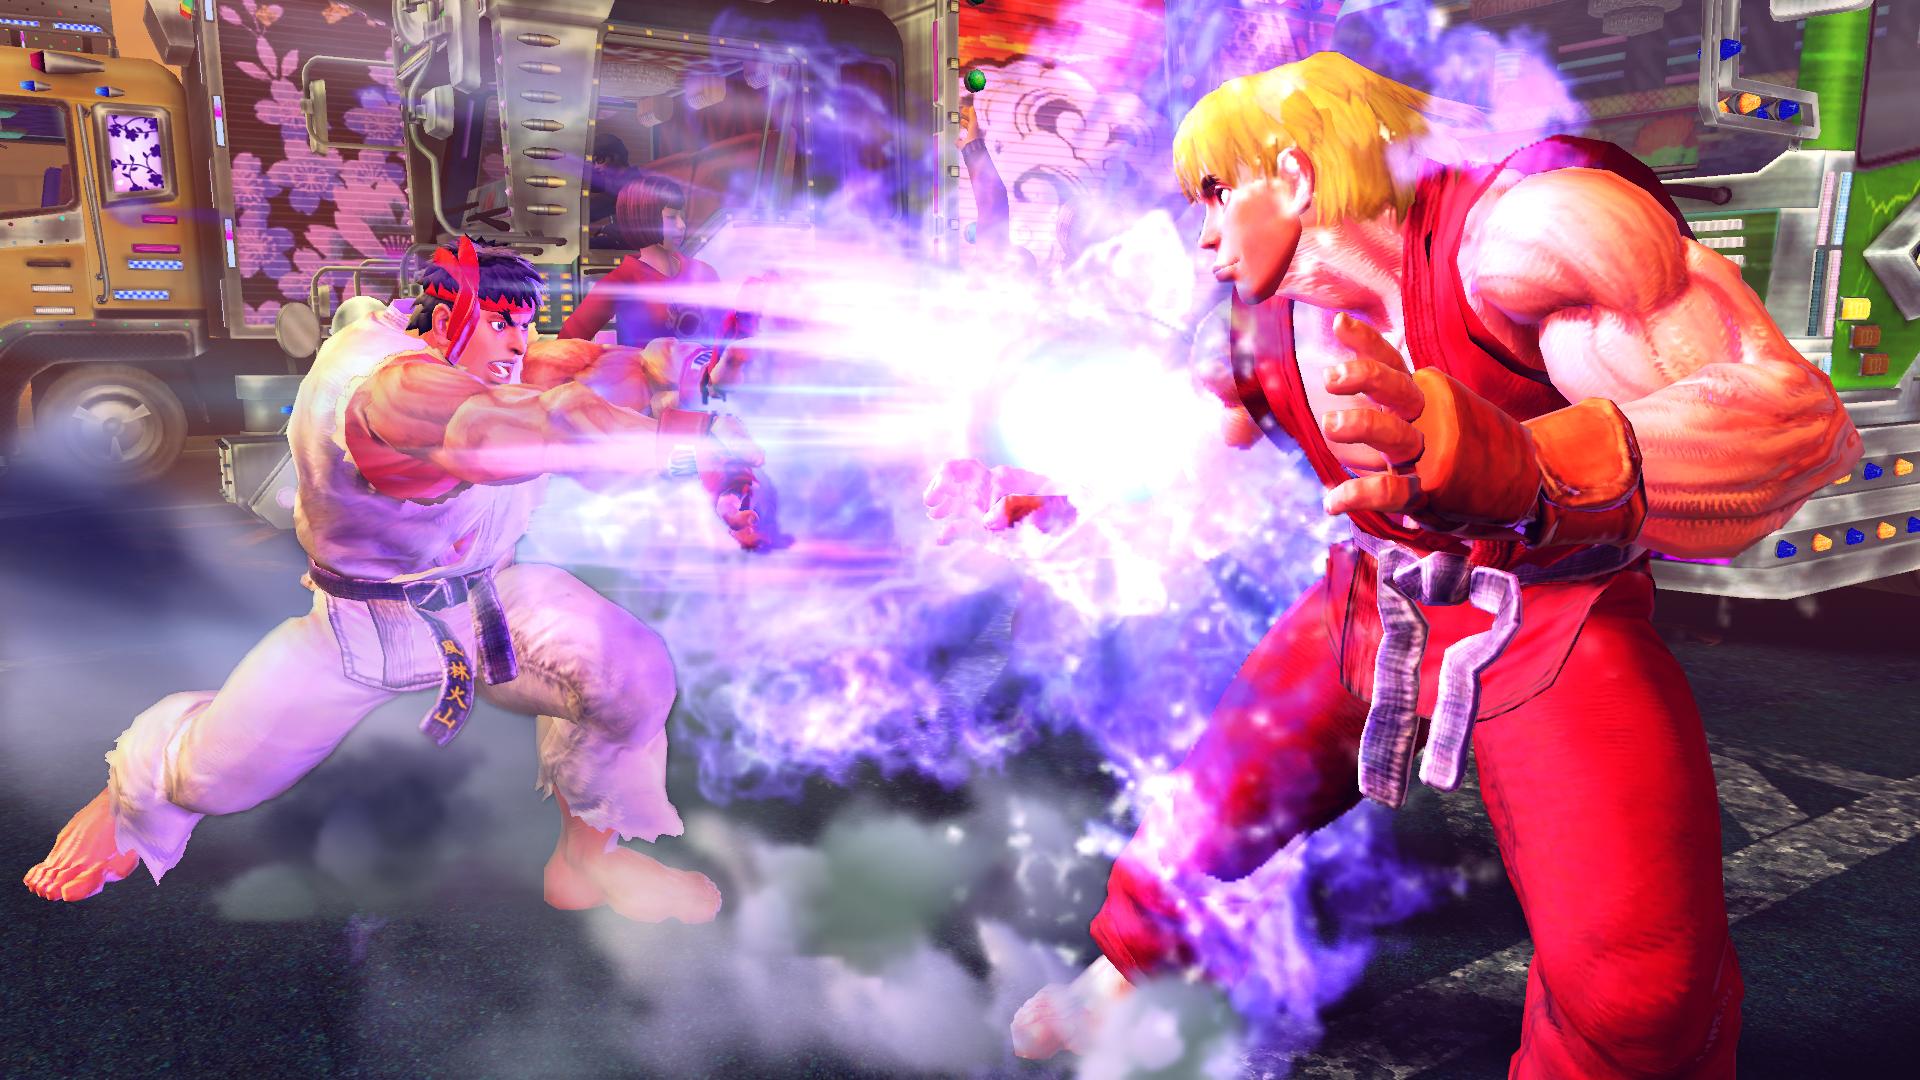 This new "2.5D" style would bring Street Fighter to the modern gaming era